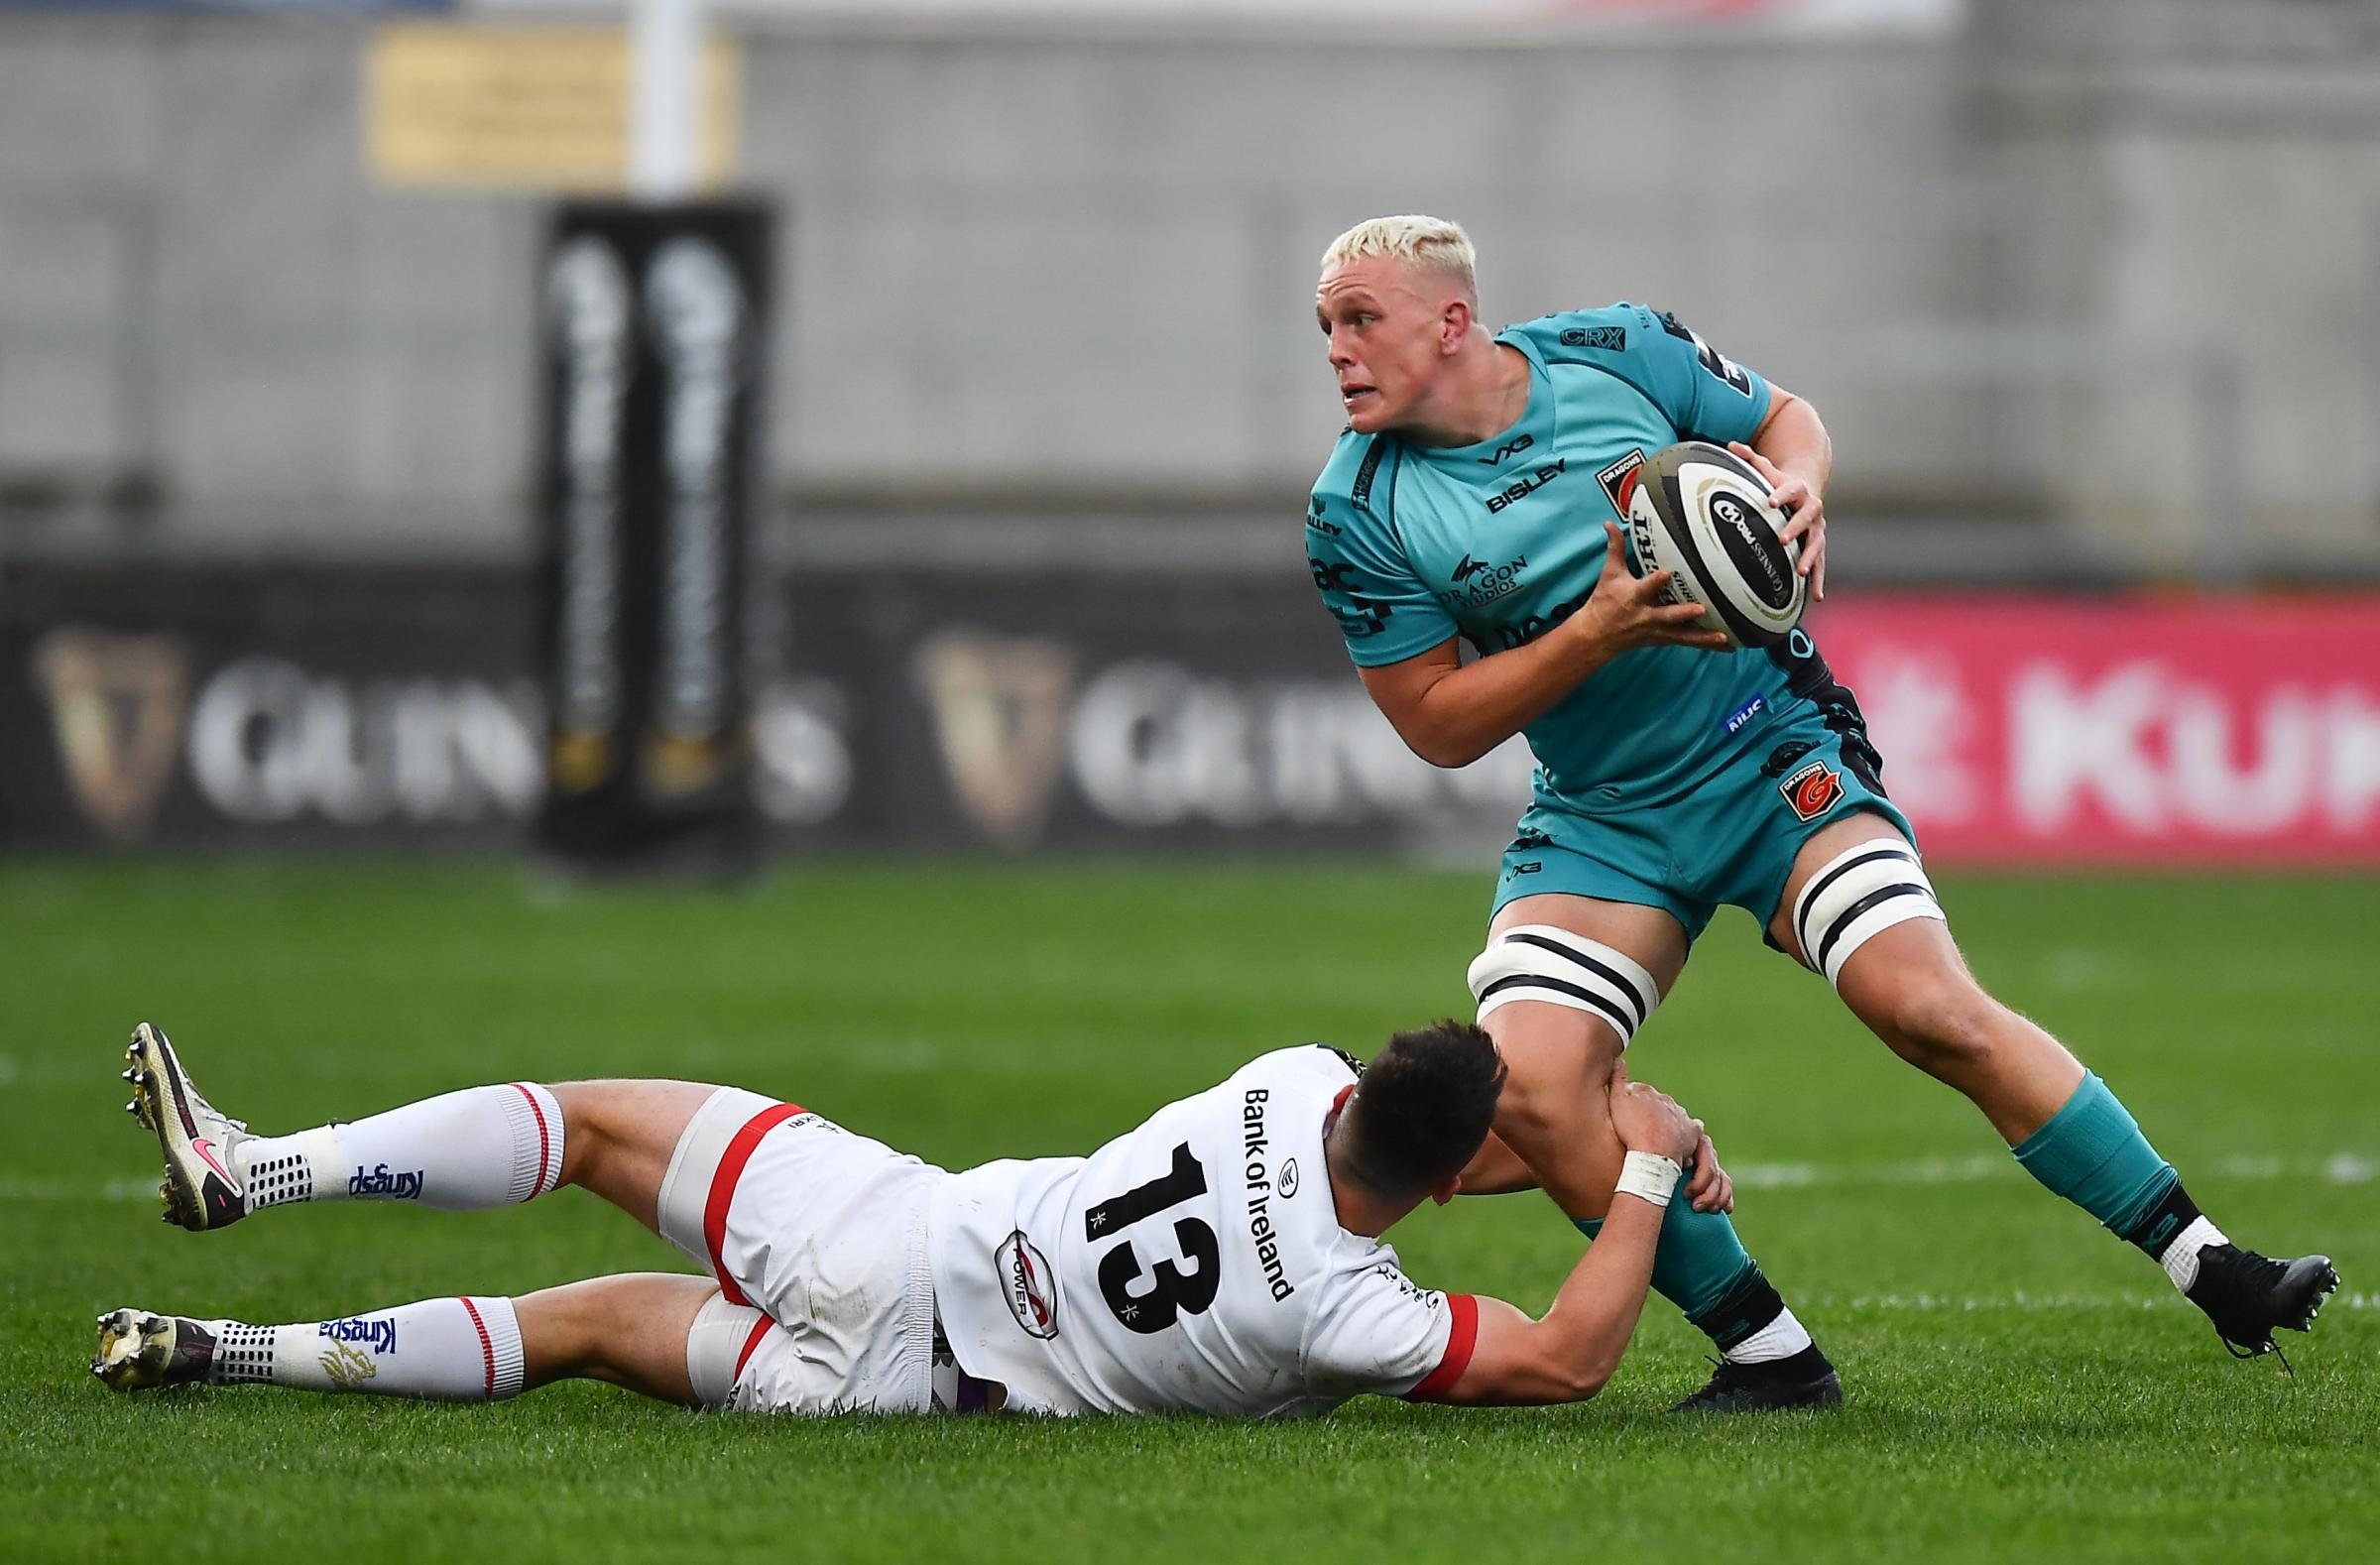 Ben Fry of Dragons is tackled by James Hume of Ulster